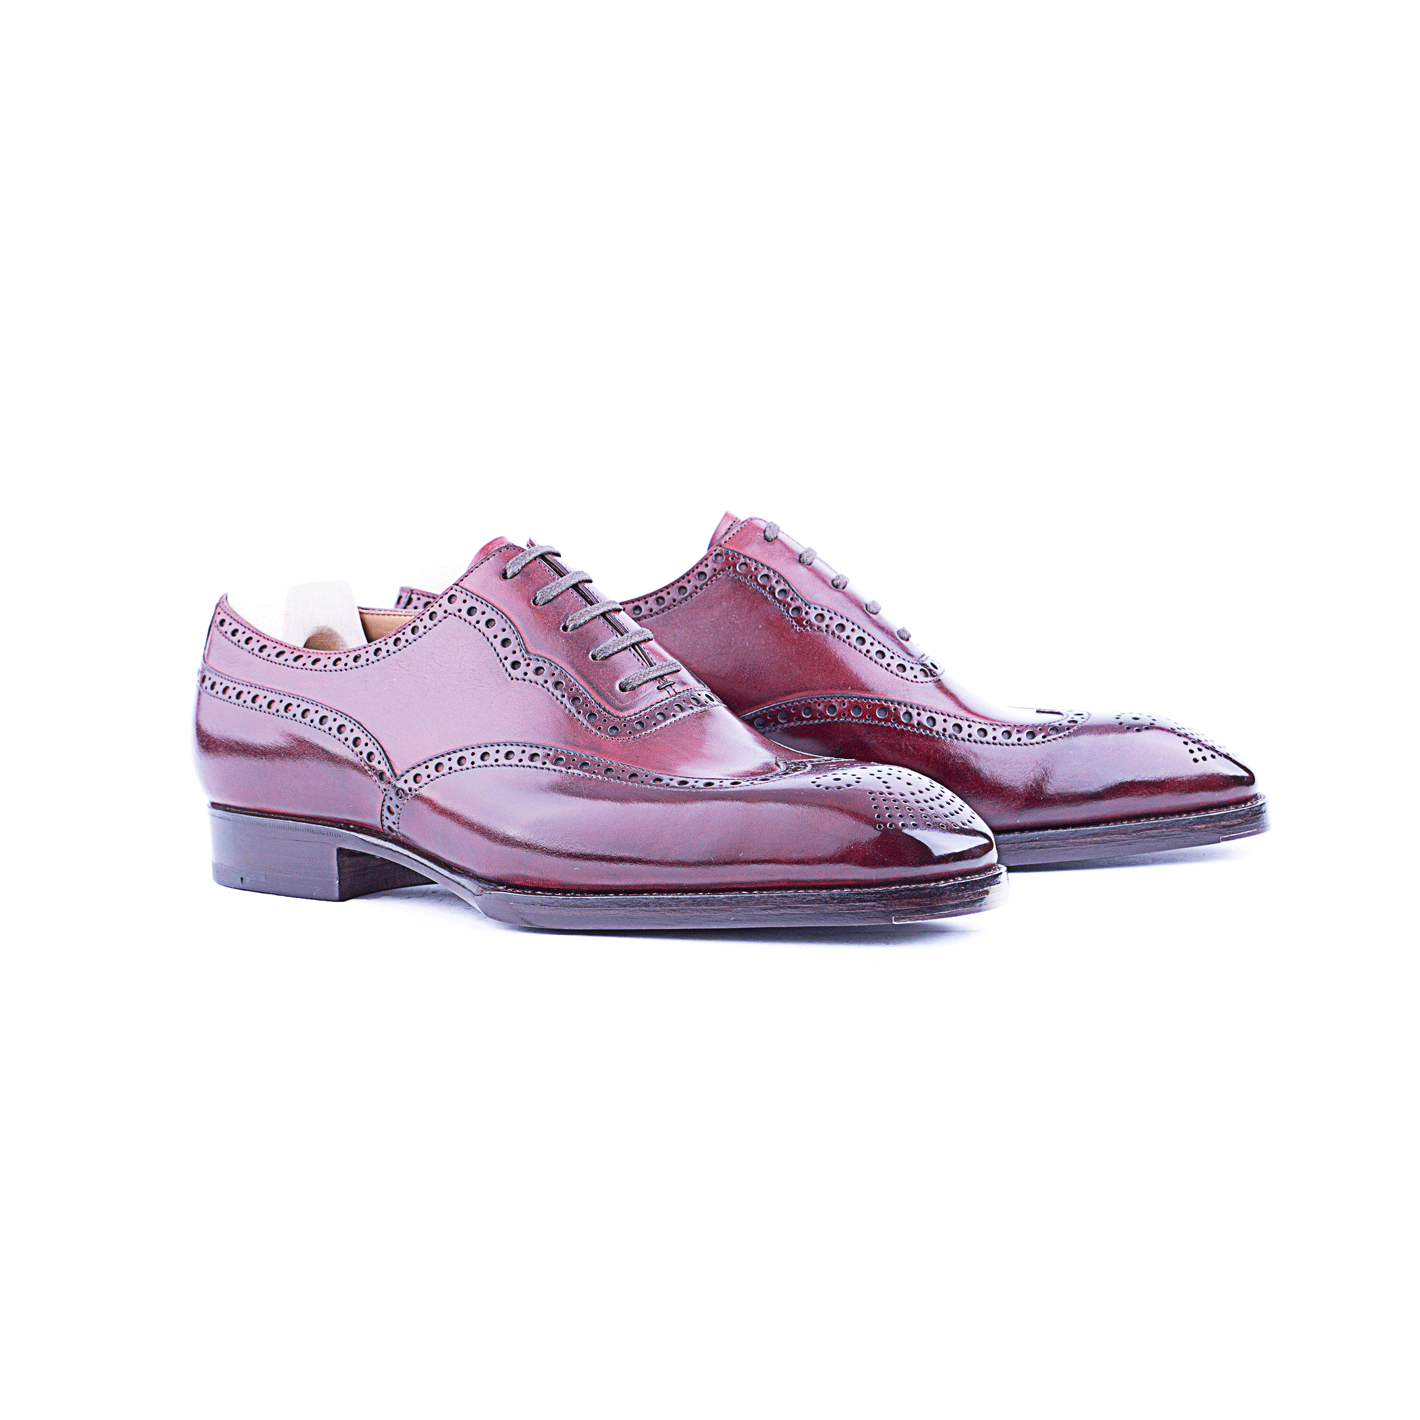 Long wing full brogued Oxford